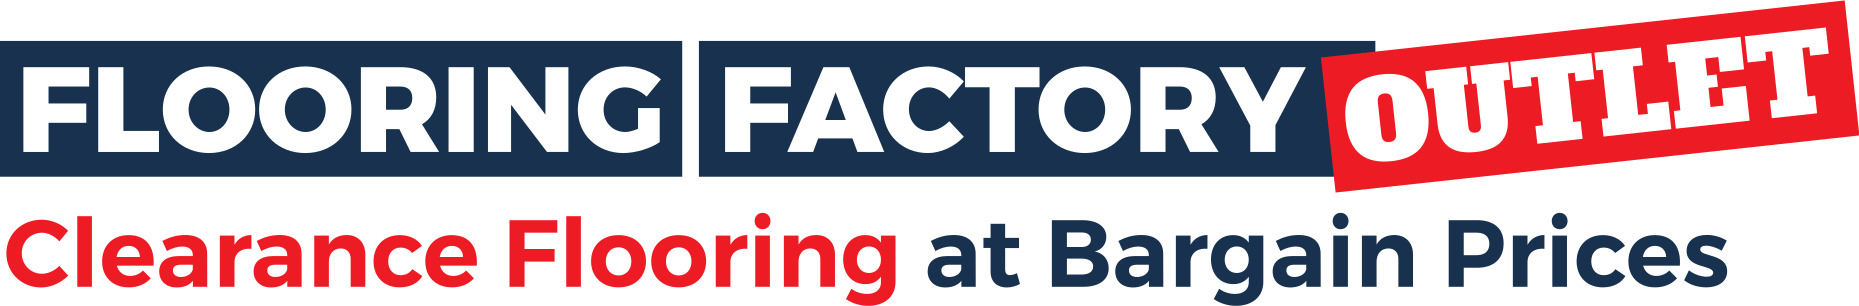 Logo of Flooring Factory Outlet